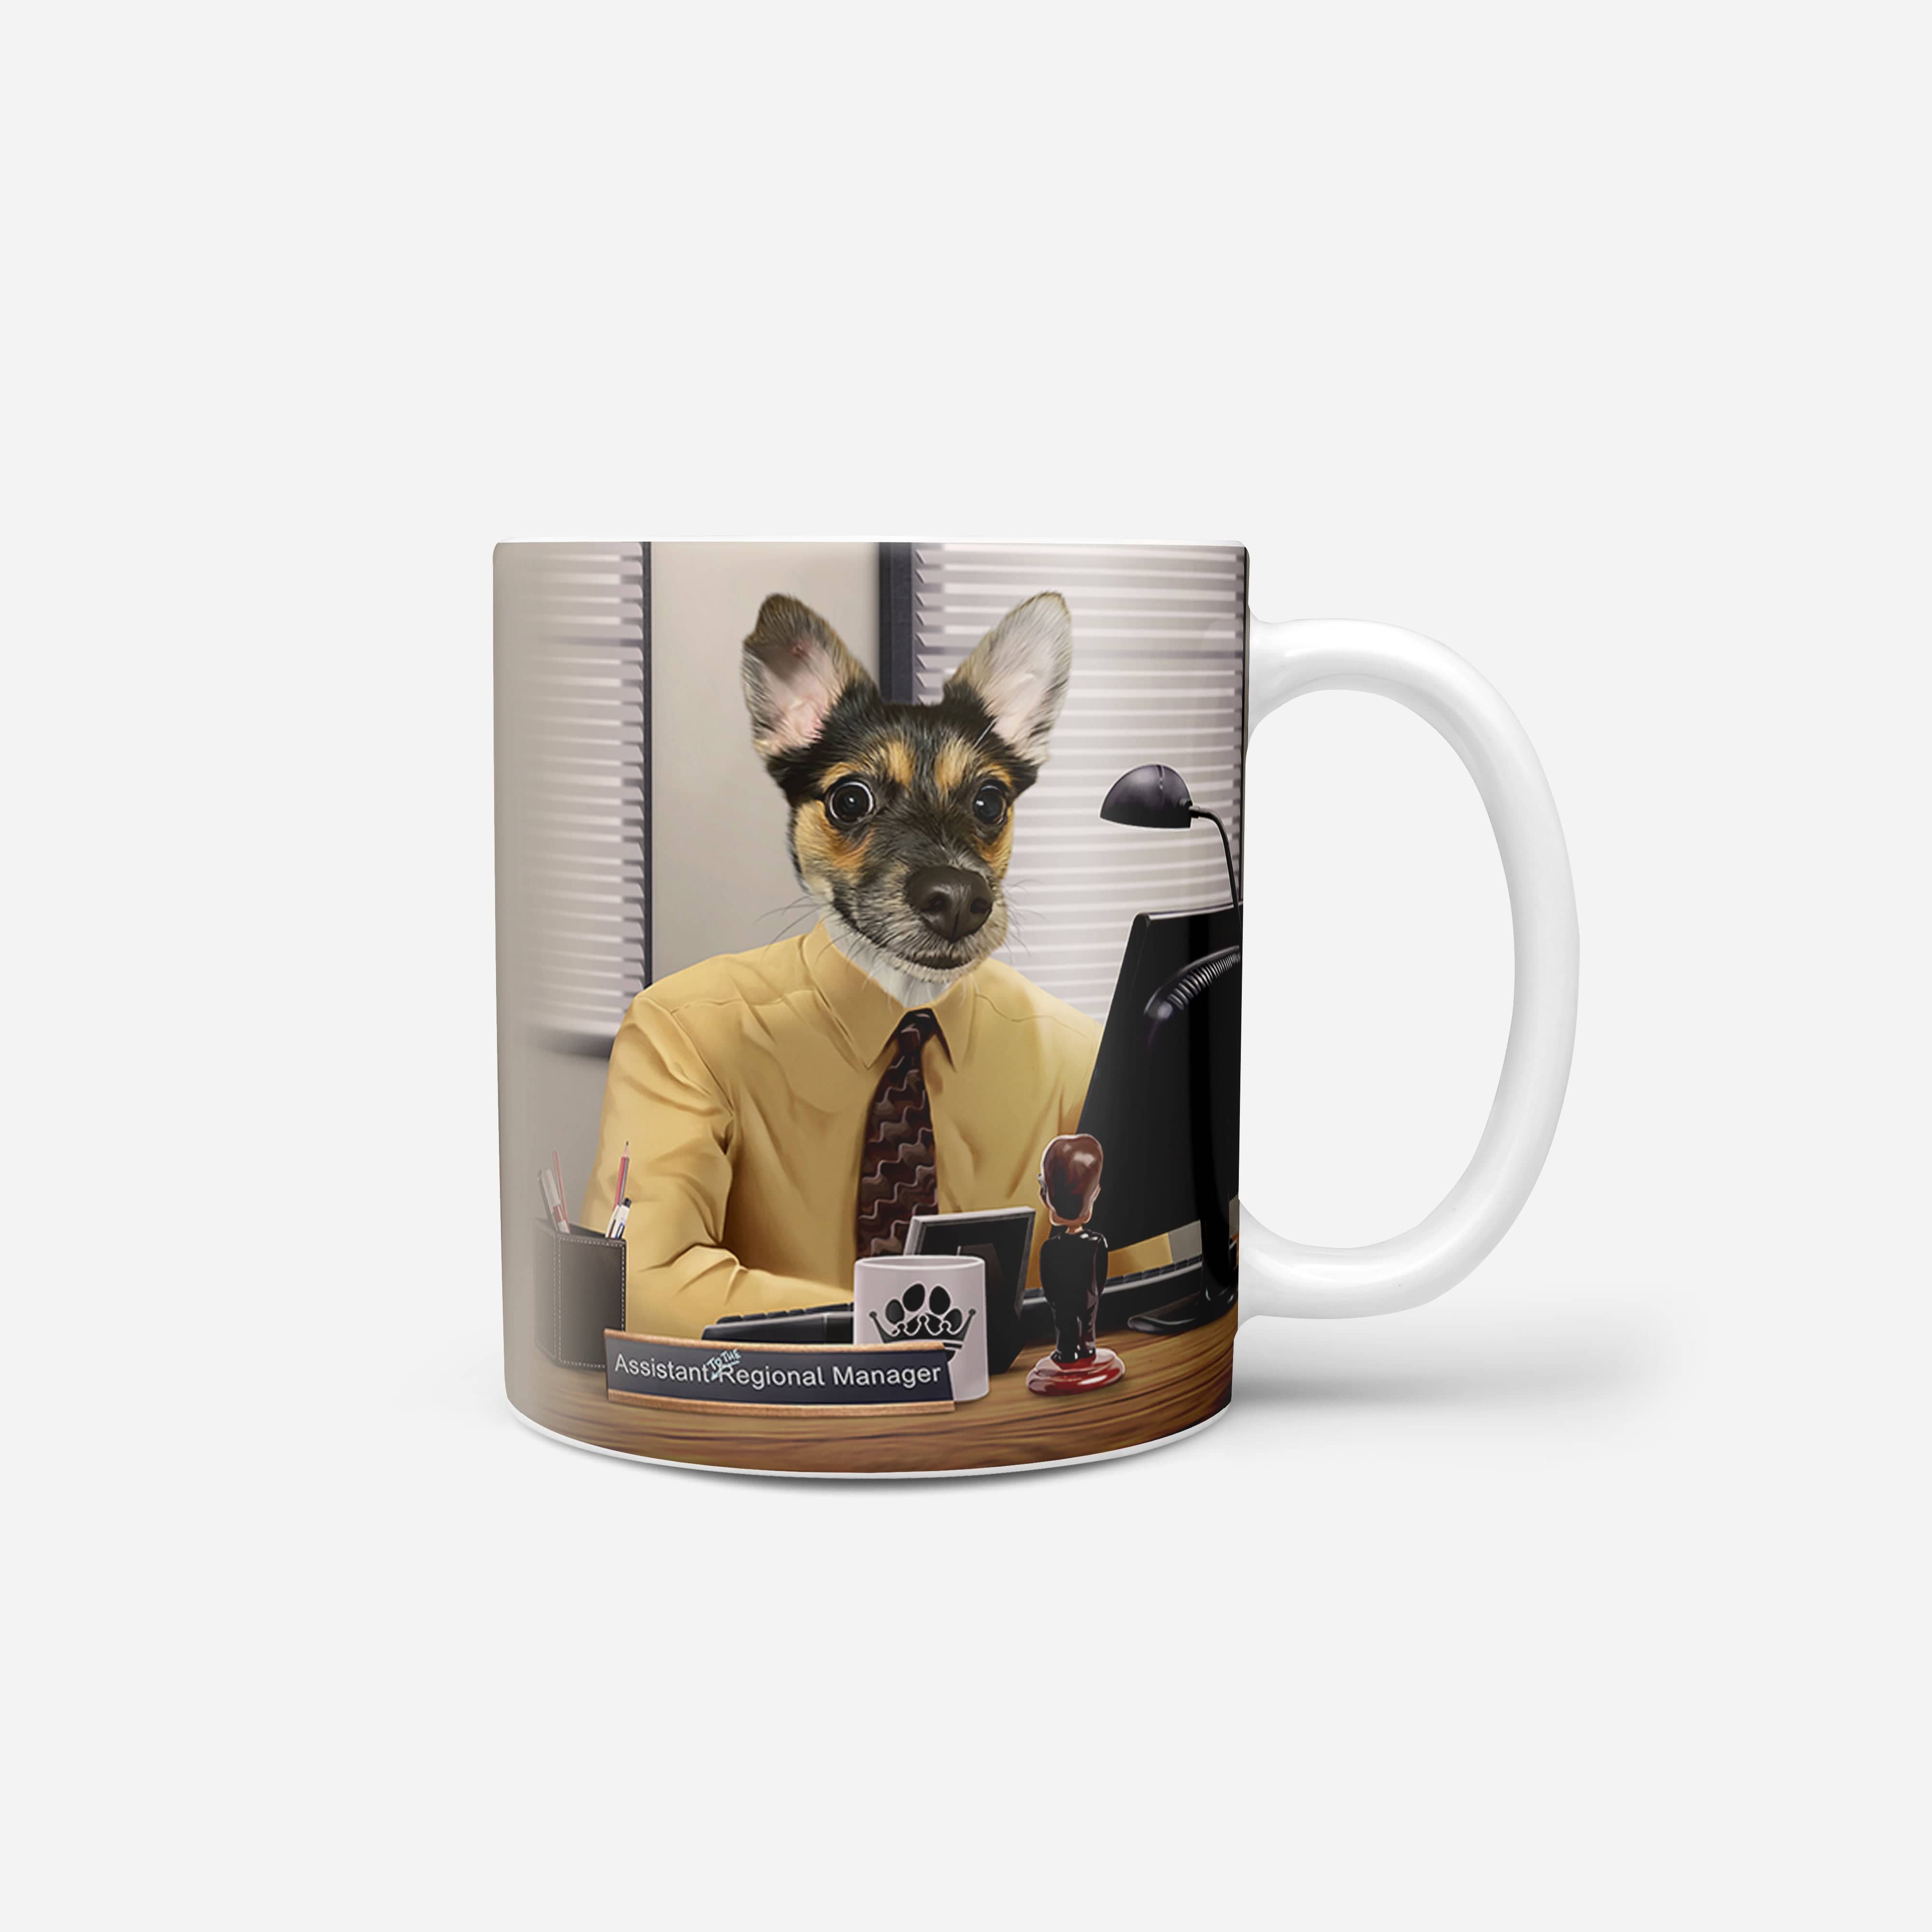 Image of The Pawssistant Manager - Custom Mug